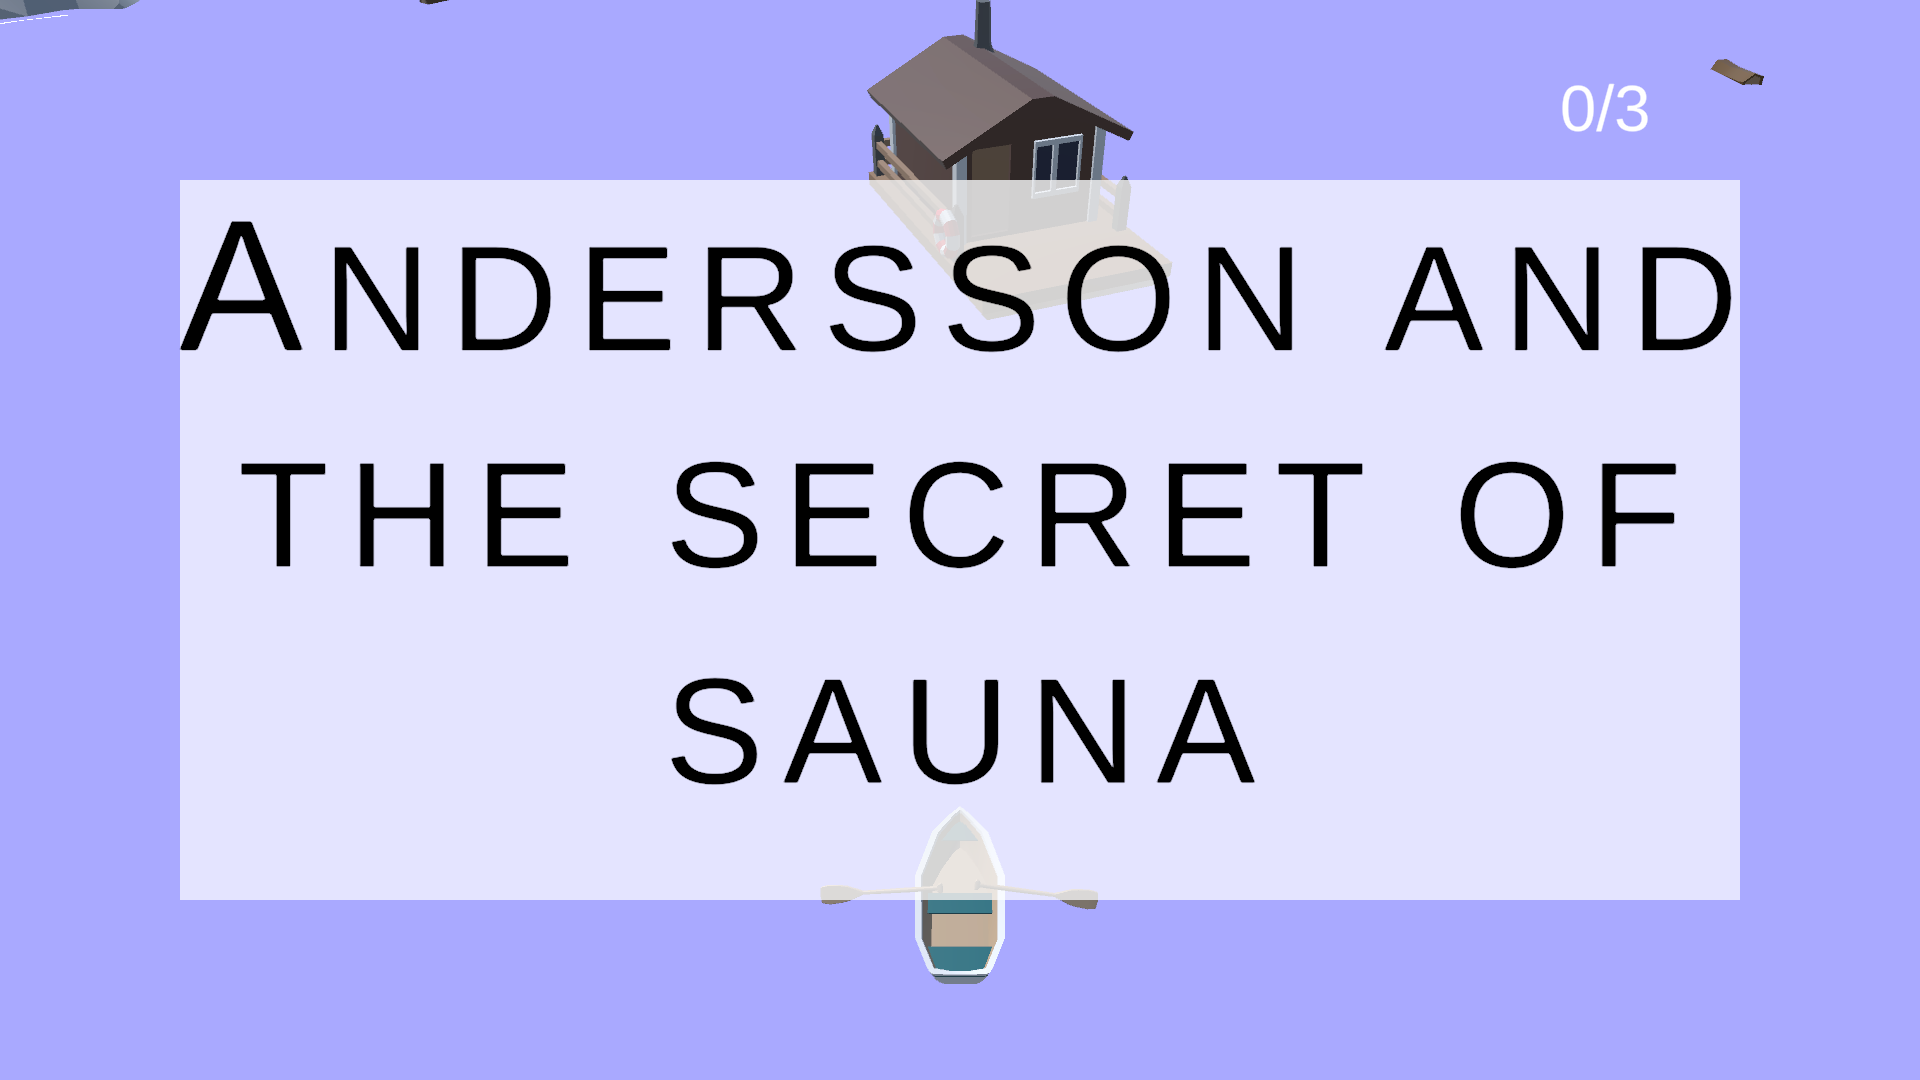 Andersson and the Secret of Sauna